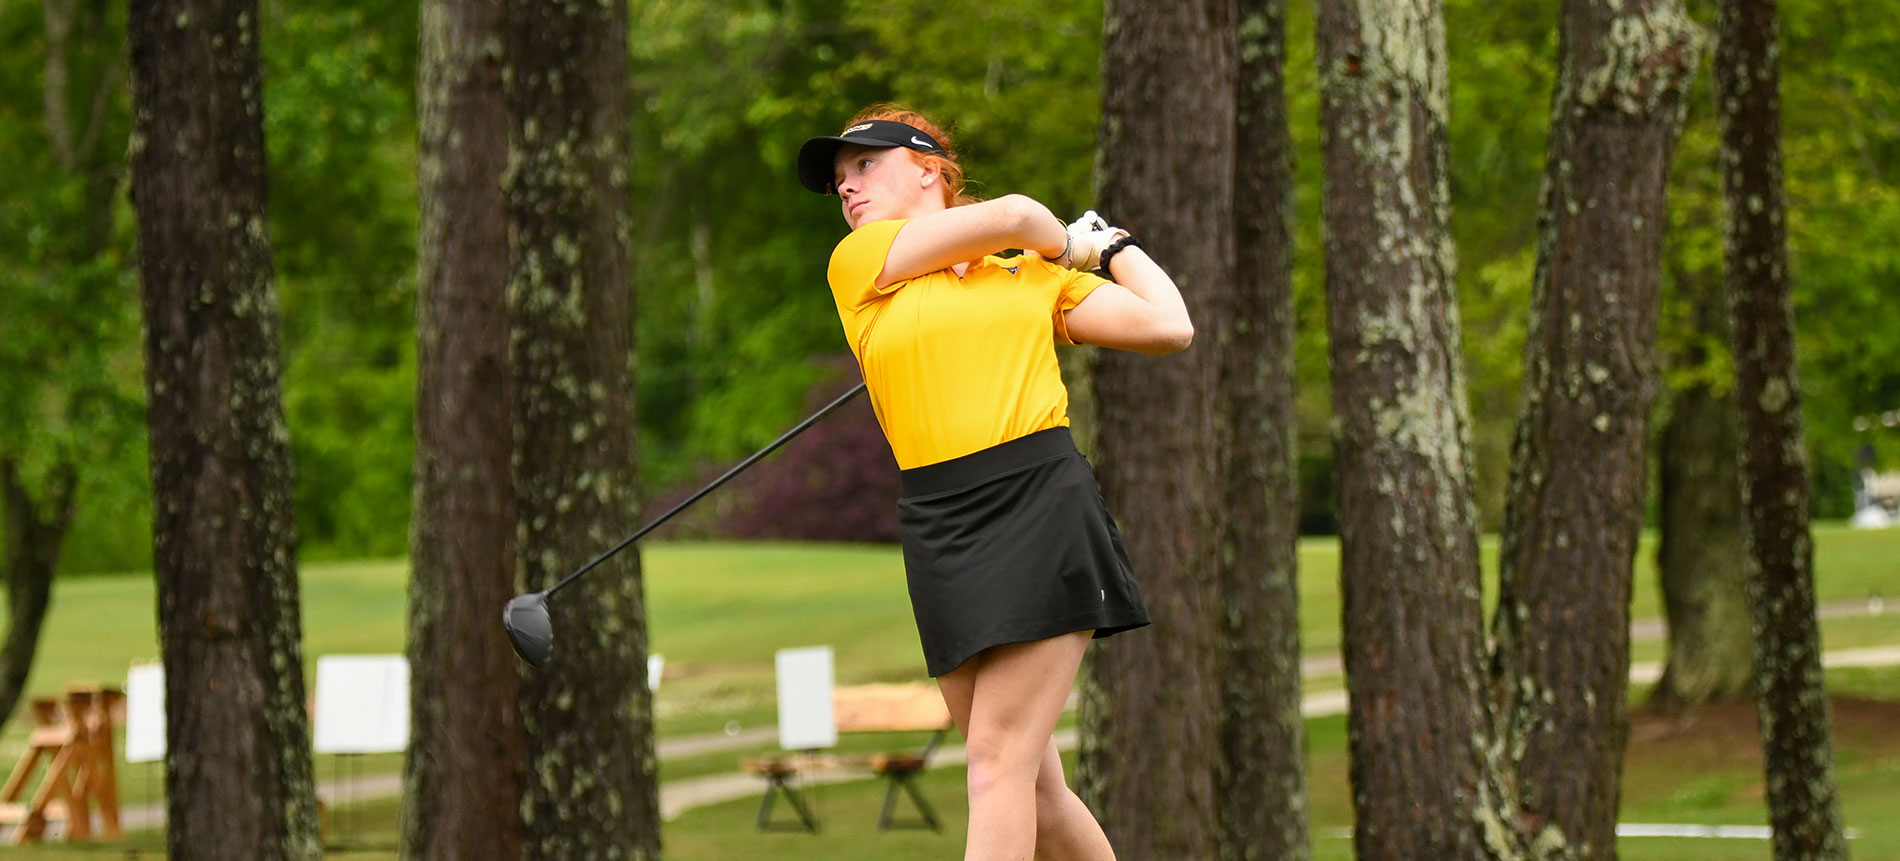 No. 4 Women’s Golf Tied for Fifth Place Following Opening Day of LeeAnn Noble Memorial